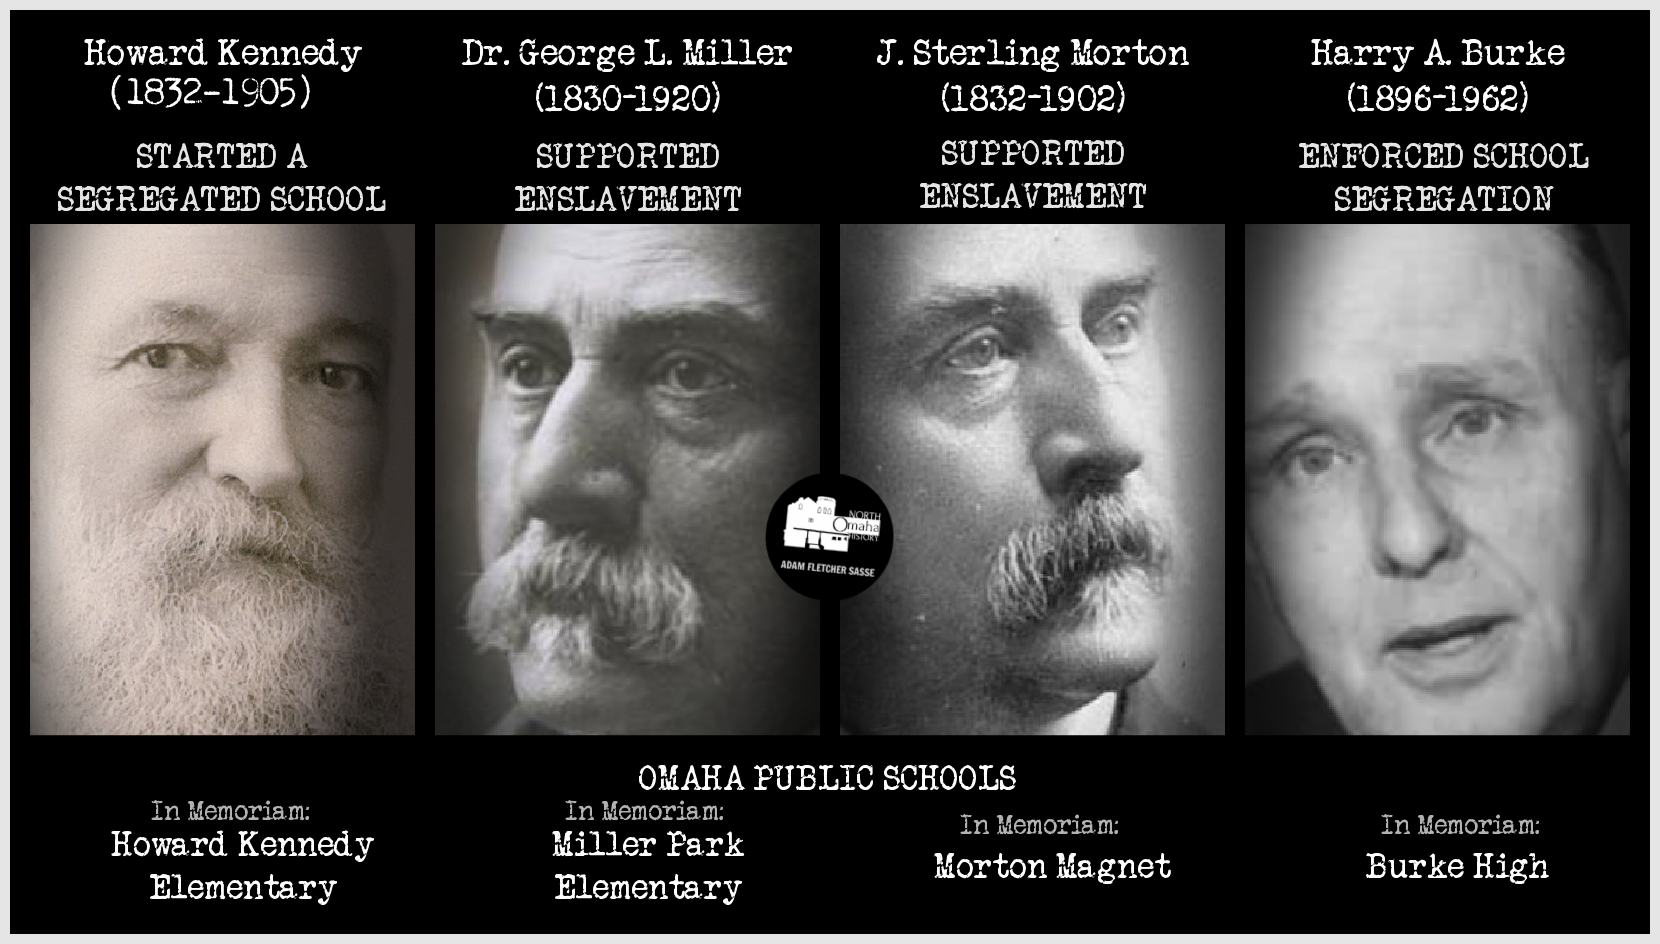 Howard Kennedy, Dr. George L. Miller, J. Sterling Morton, and Harry A. Burke are among the racists that several Omaha Public Schools are named in memory of.